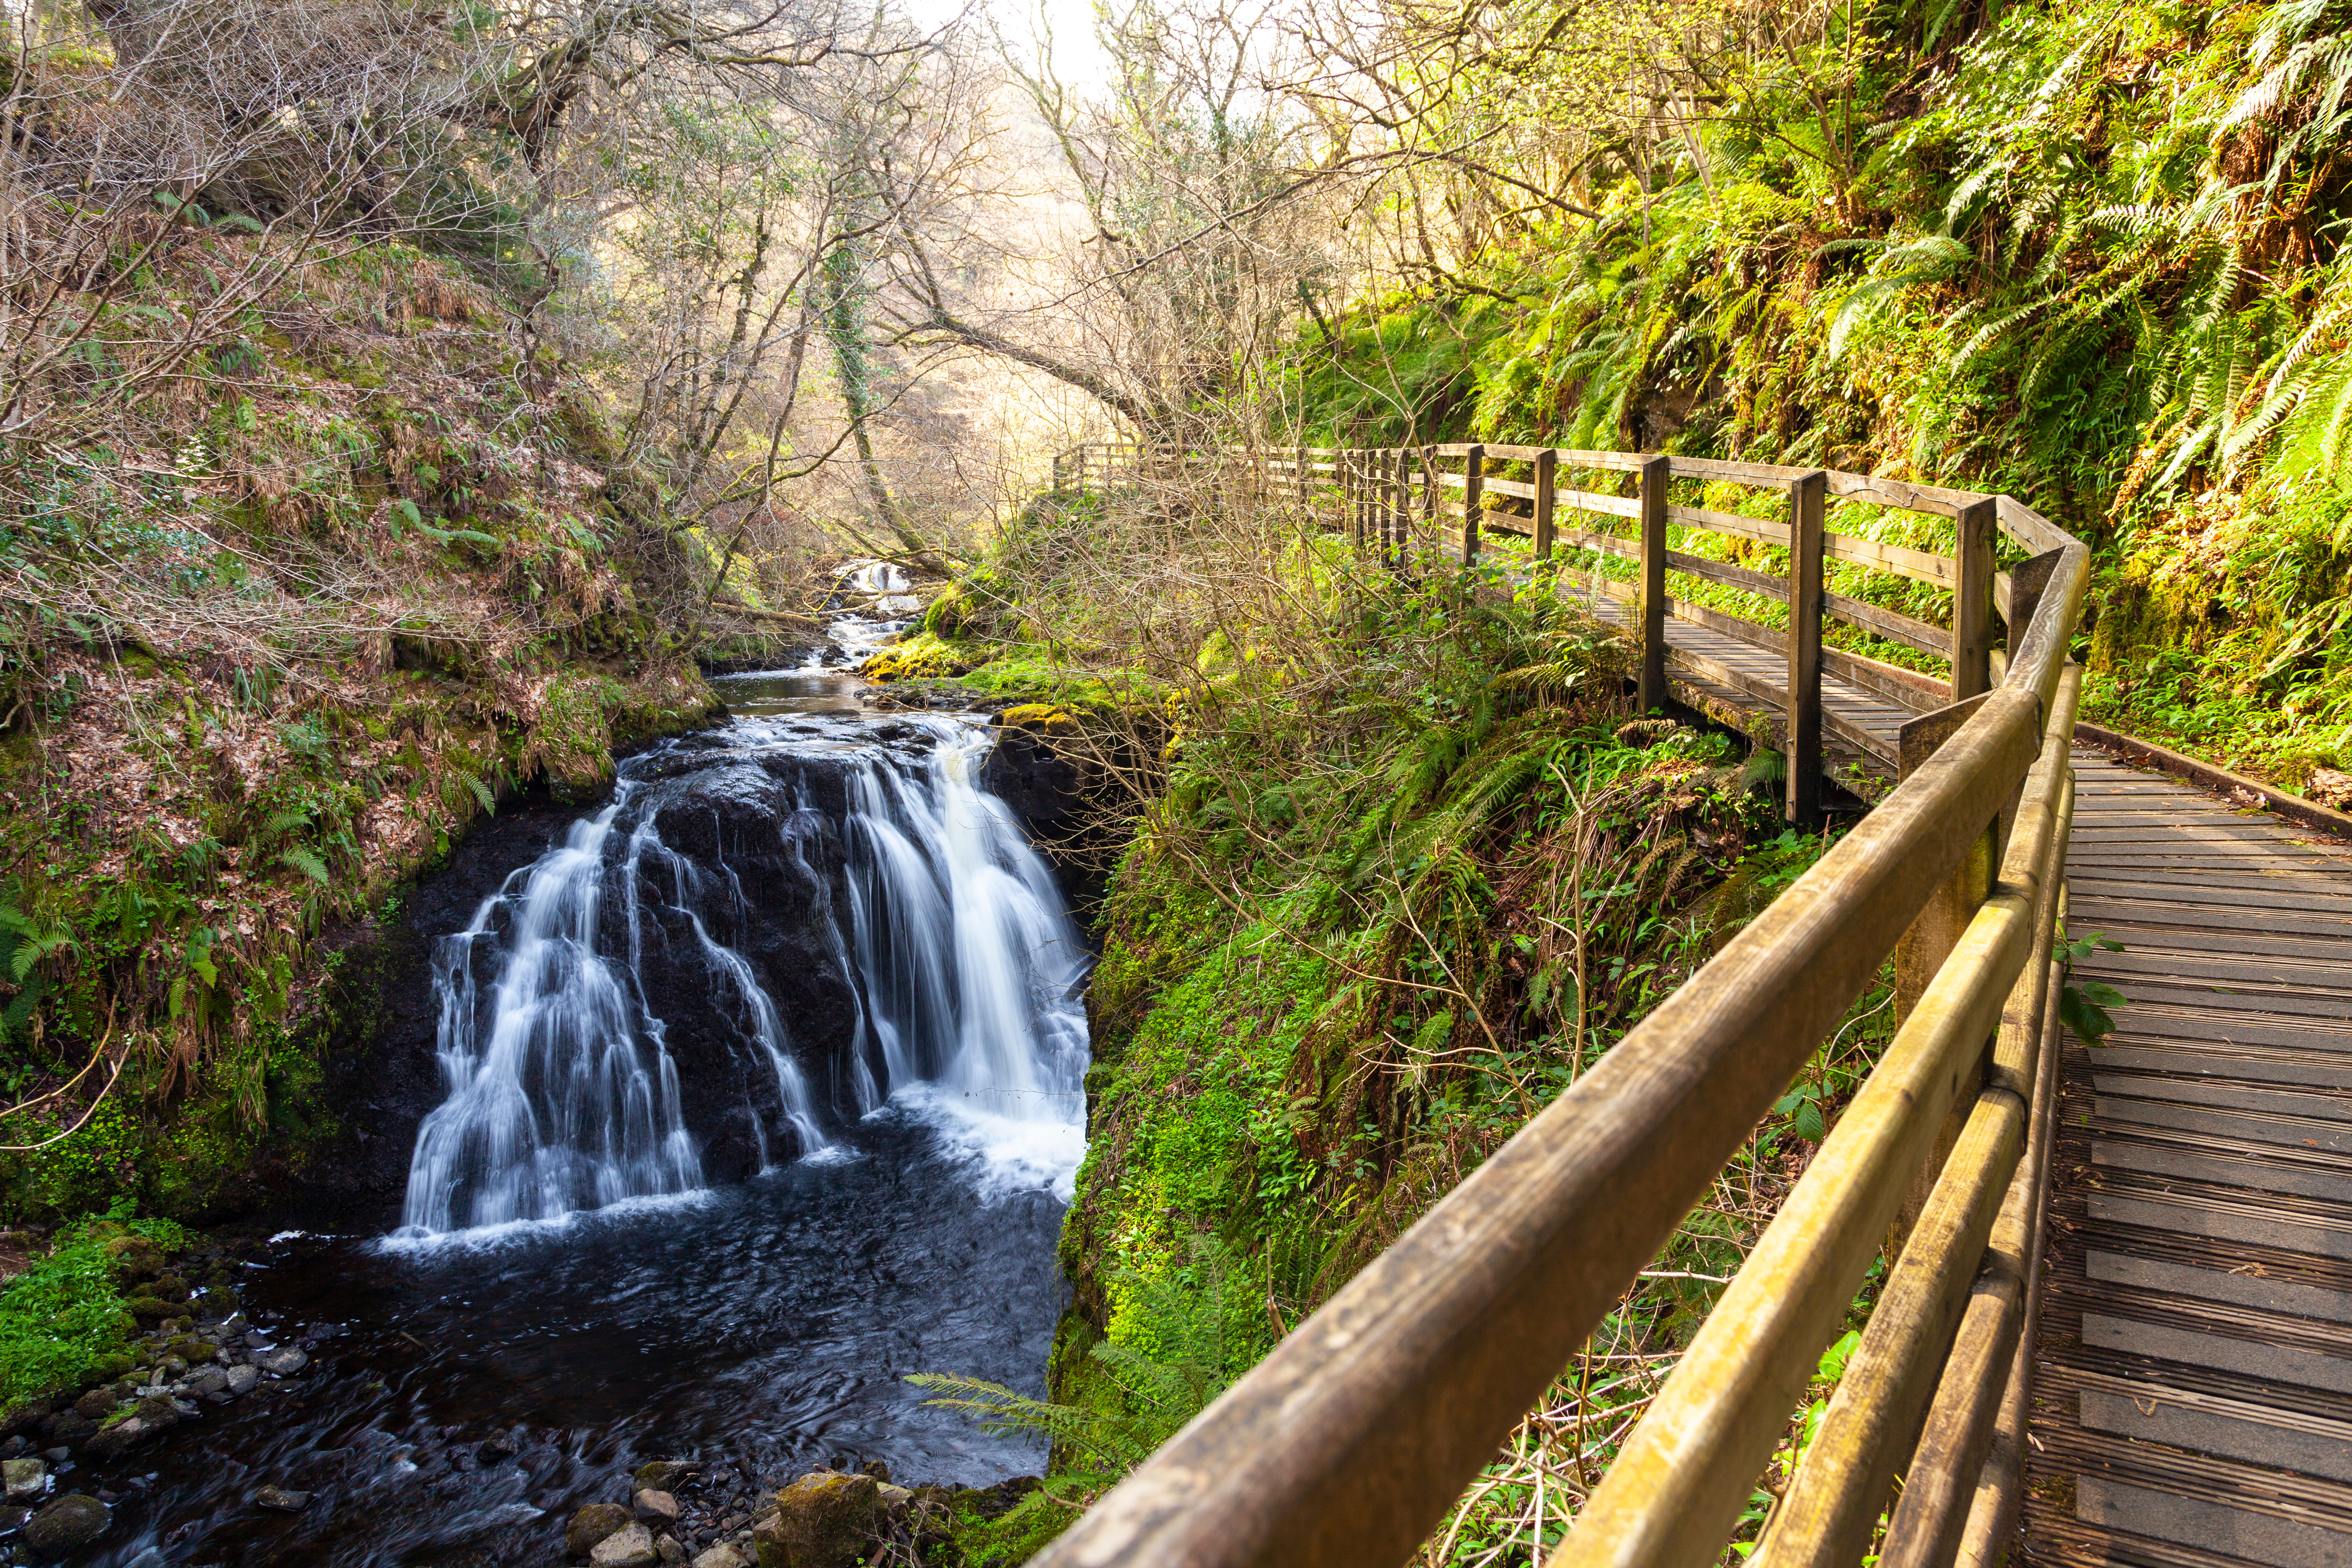 The beautiful countryside around Ballymena is perfect for outdoor pursuits